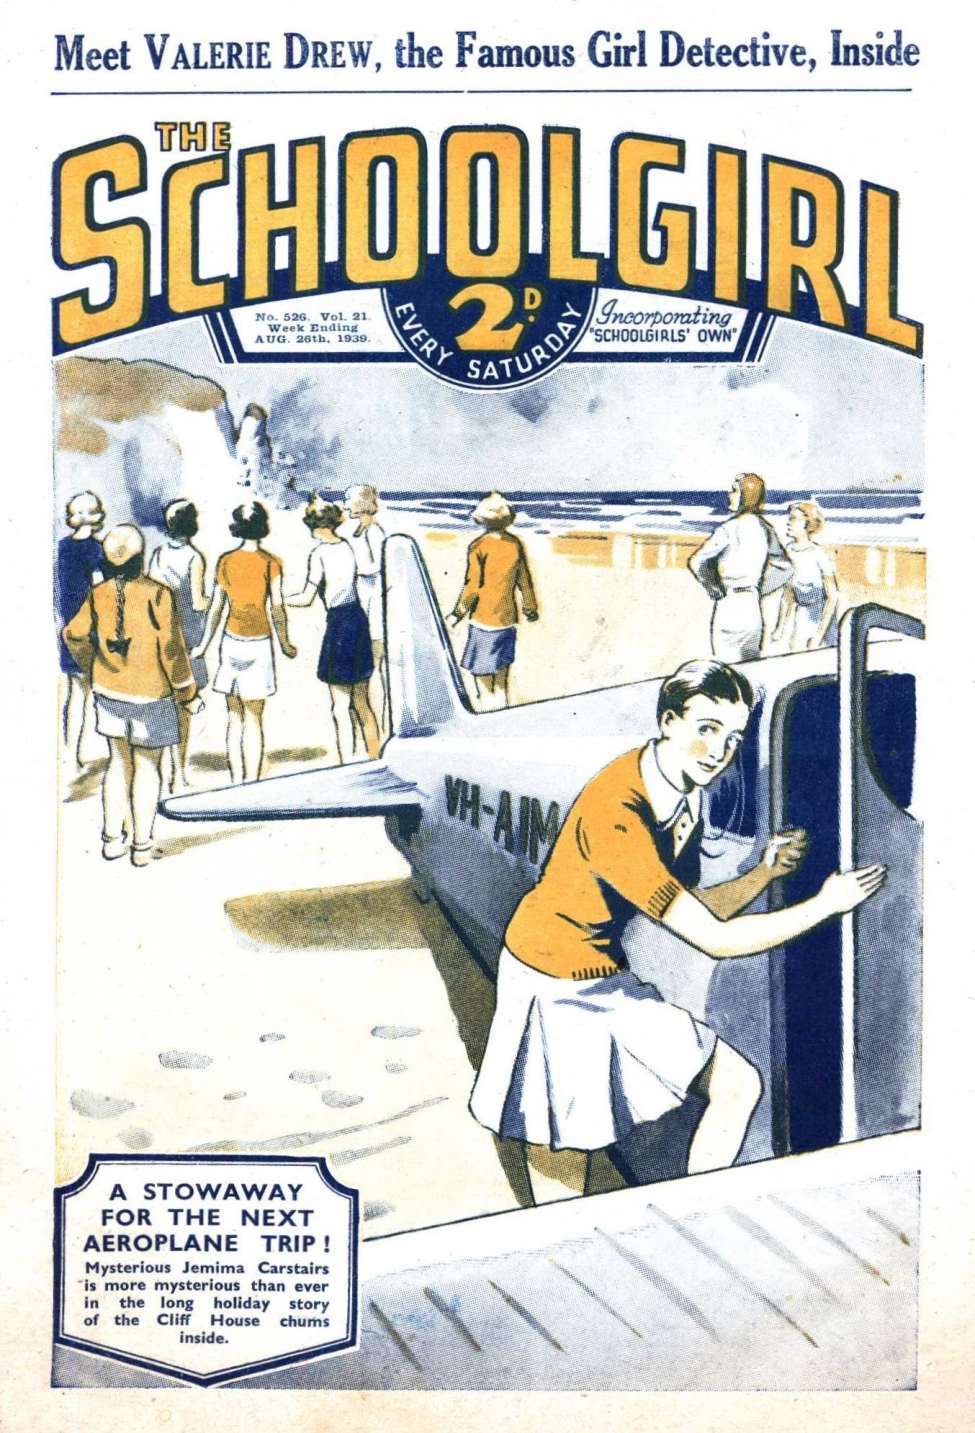 Book Cover For The Schoolgirl 526